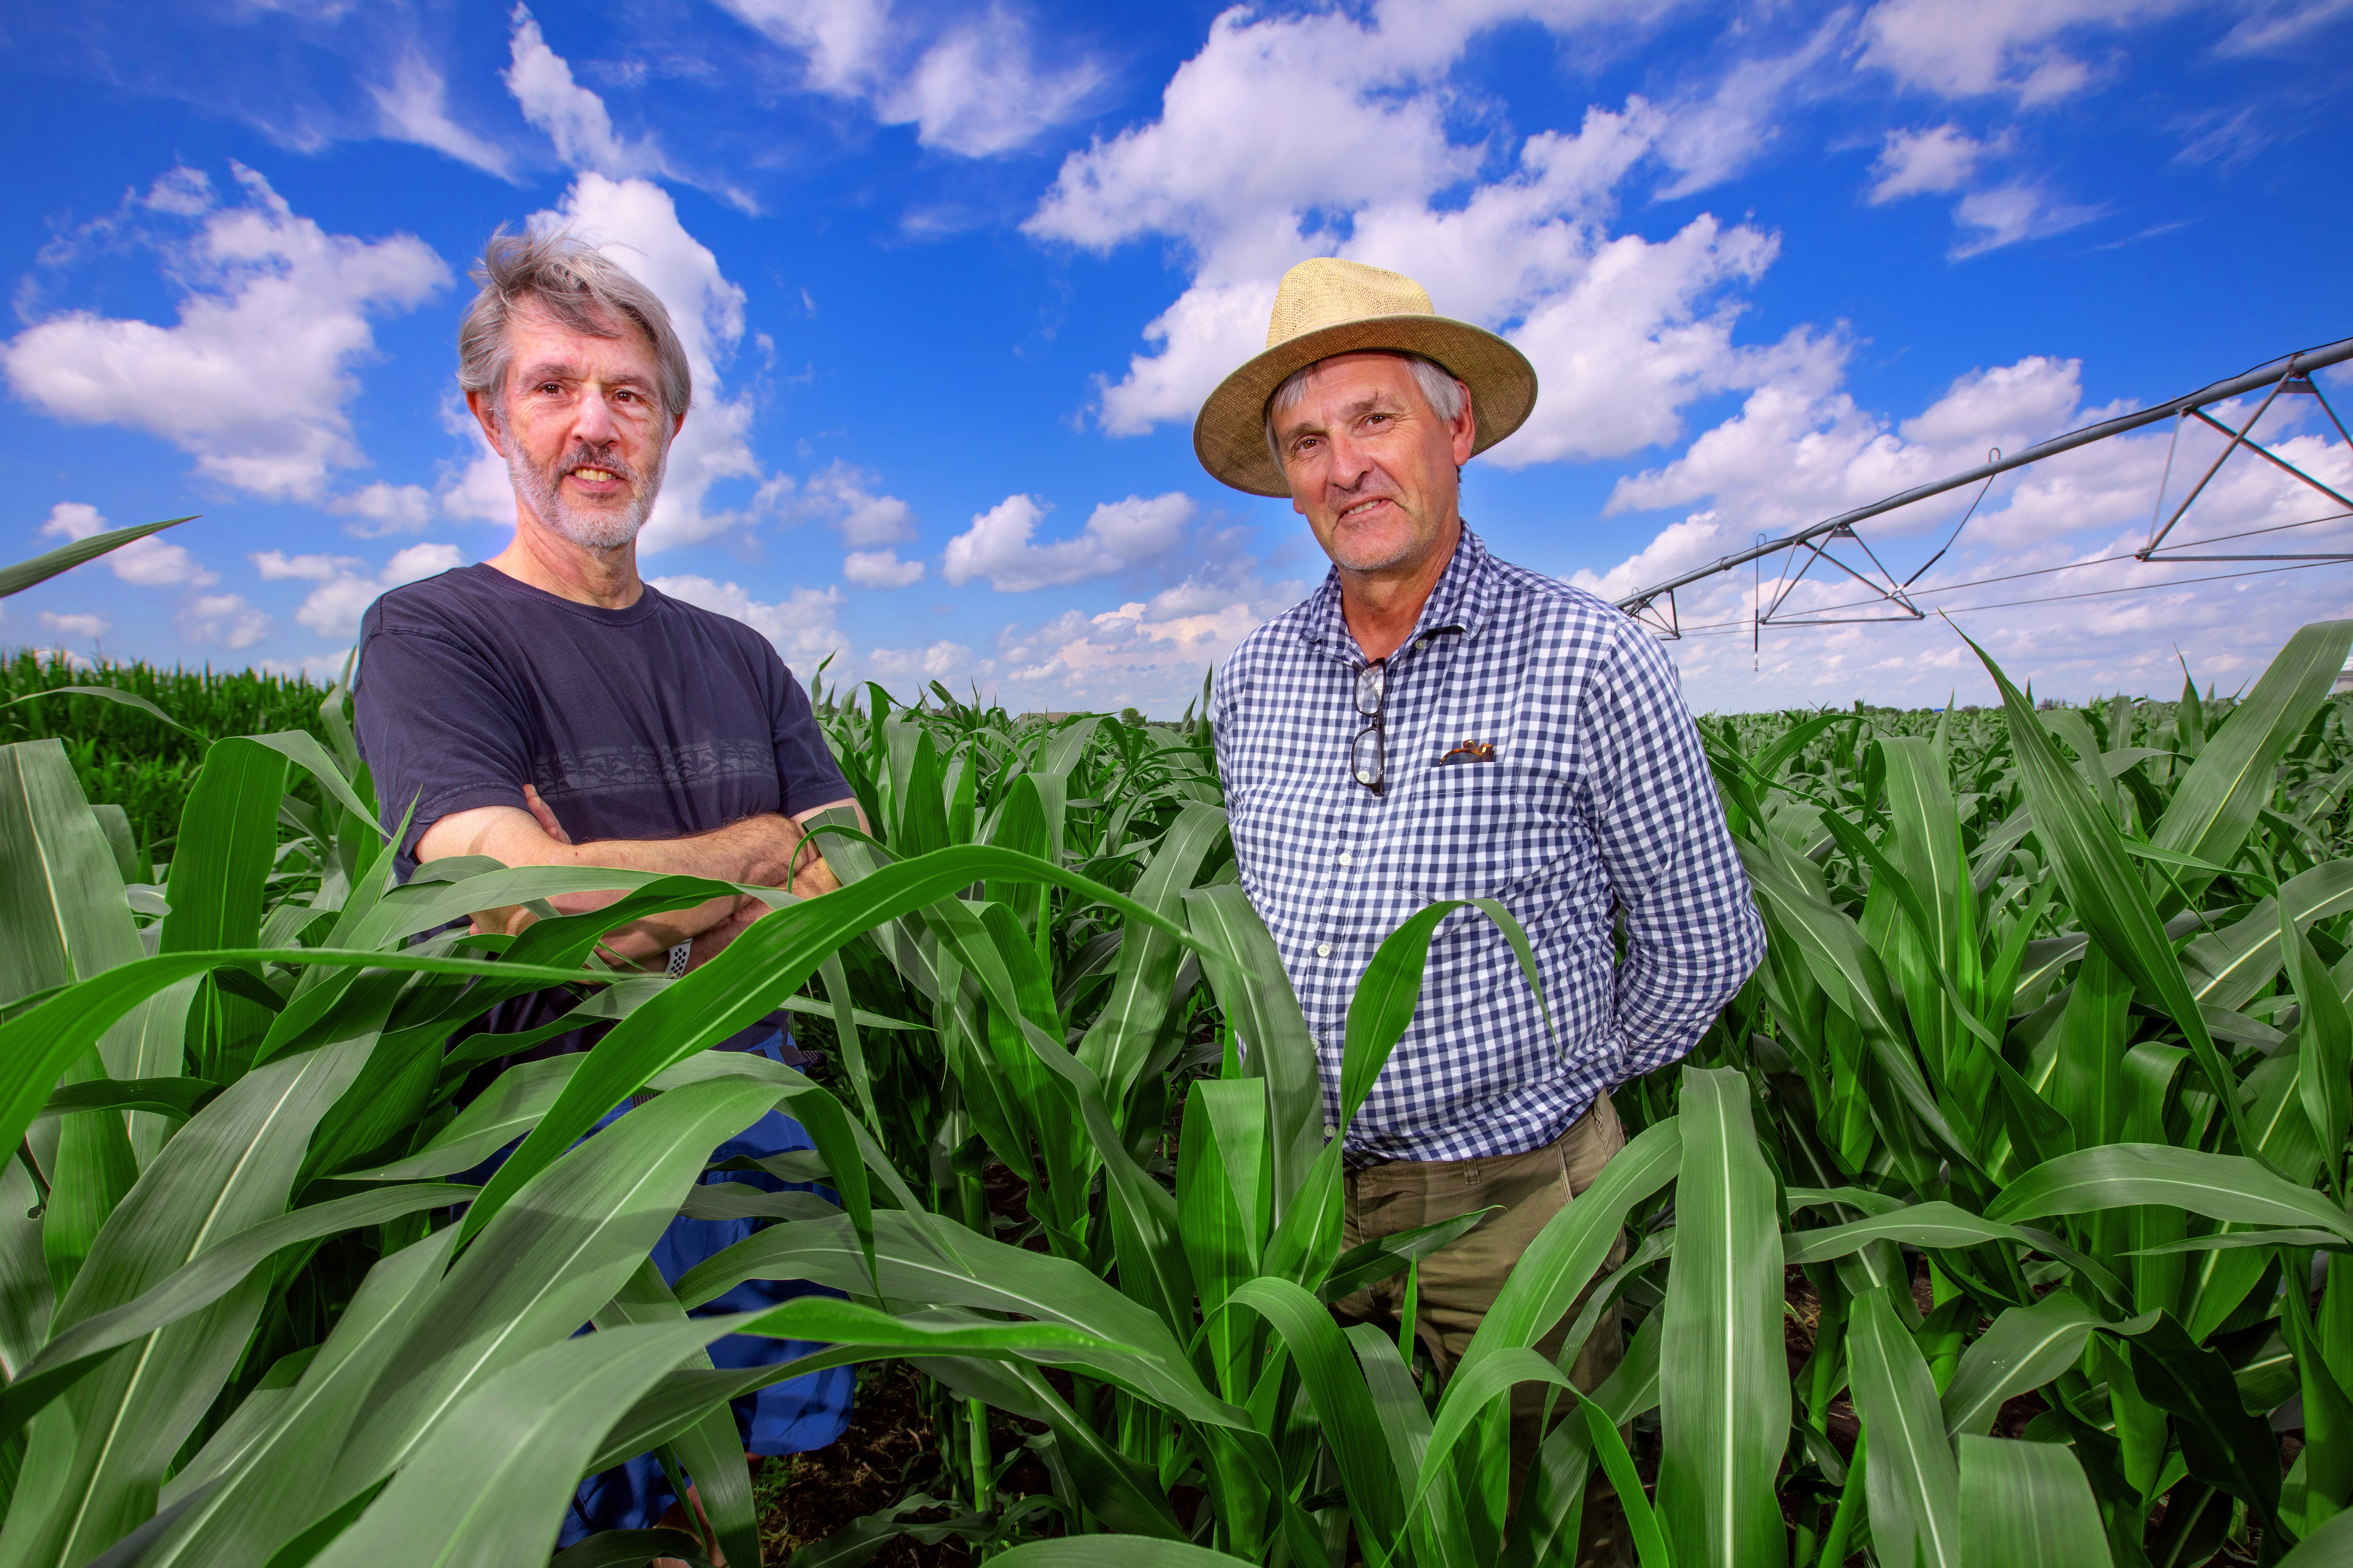 Alan Myers and Thomas Lubberstedt in a corn field